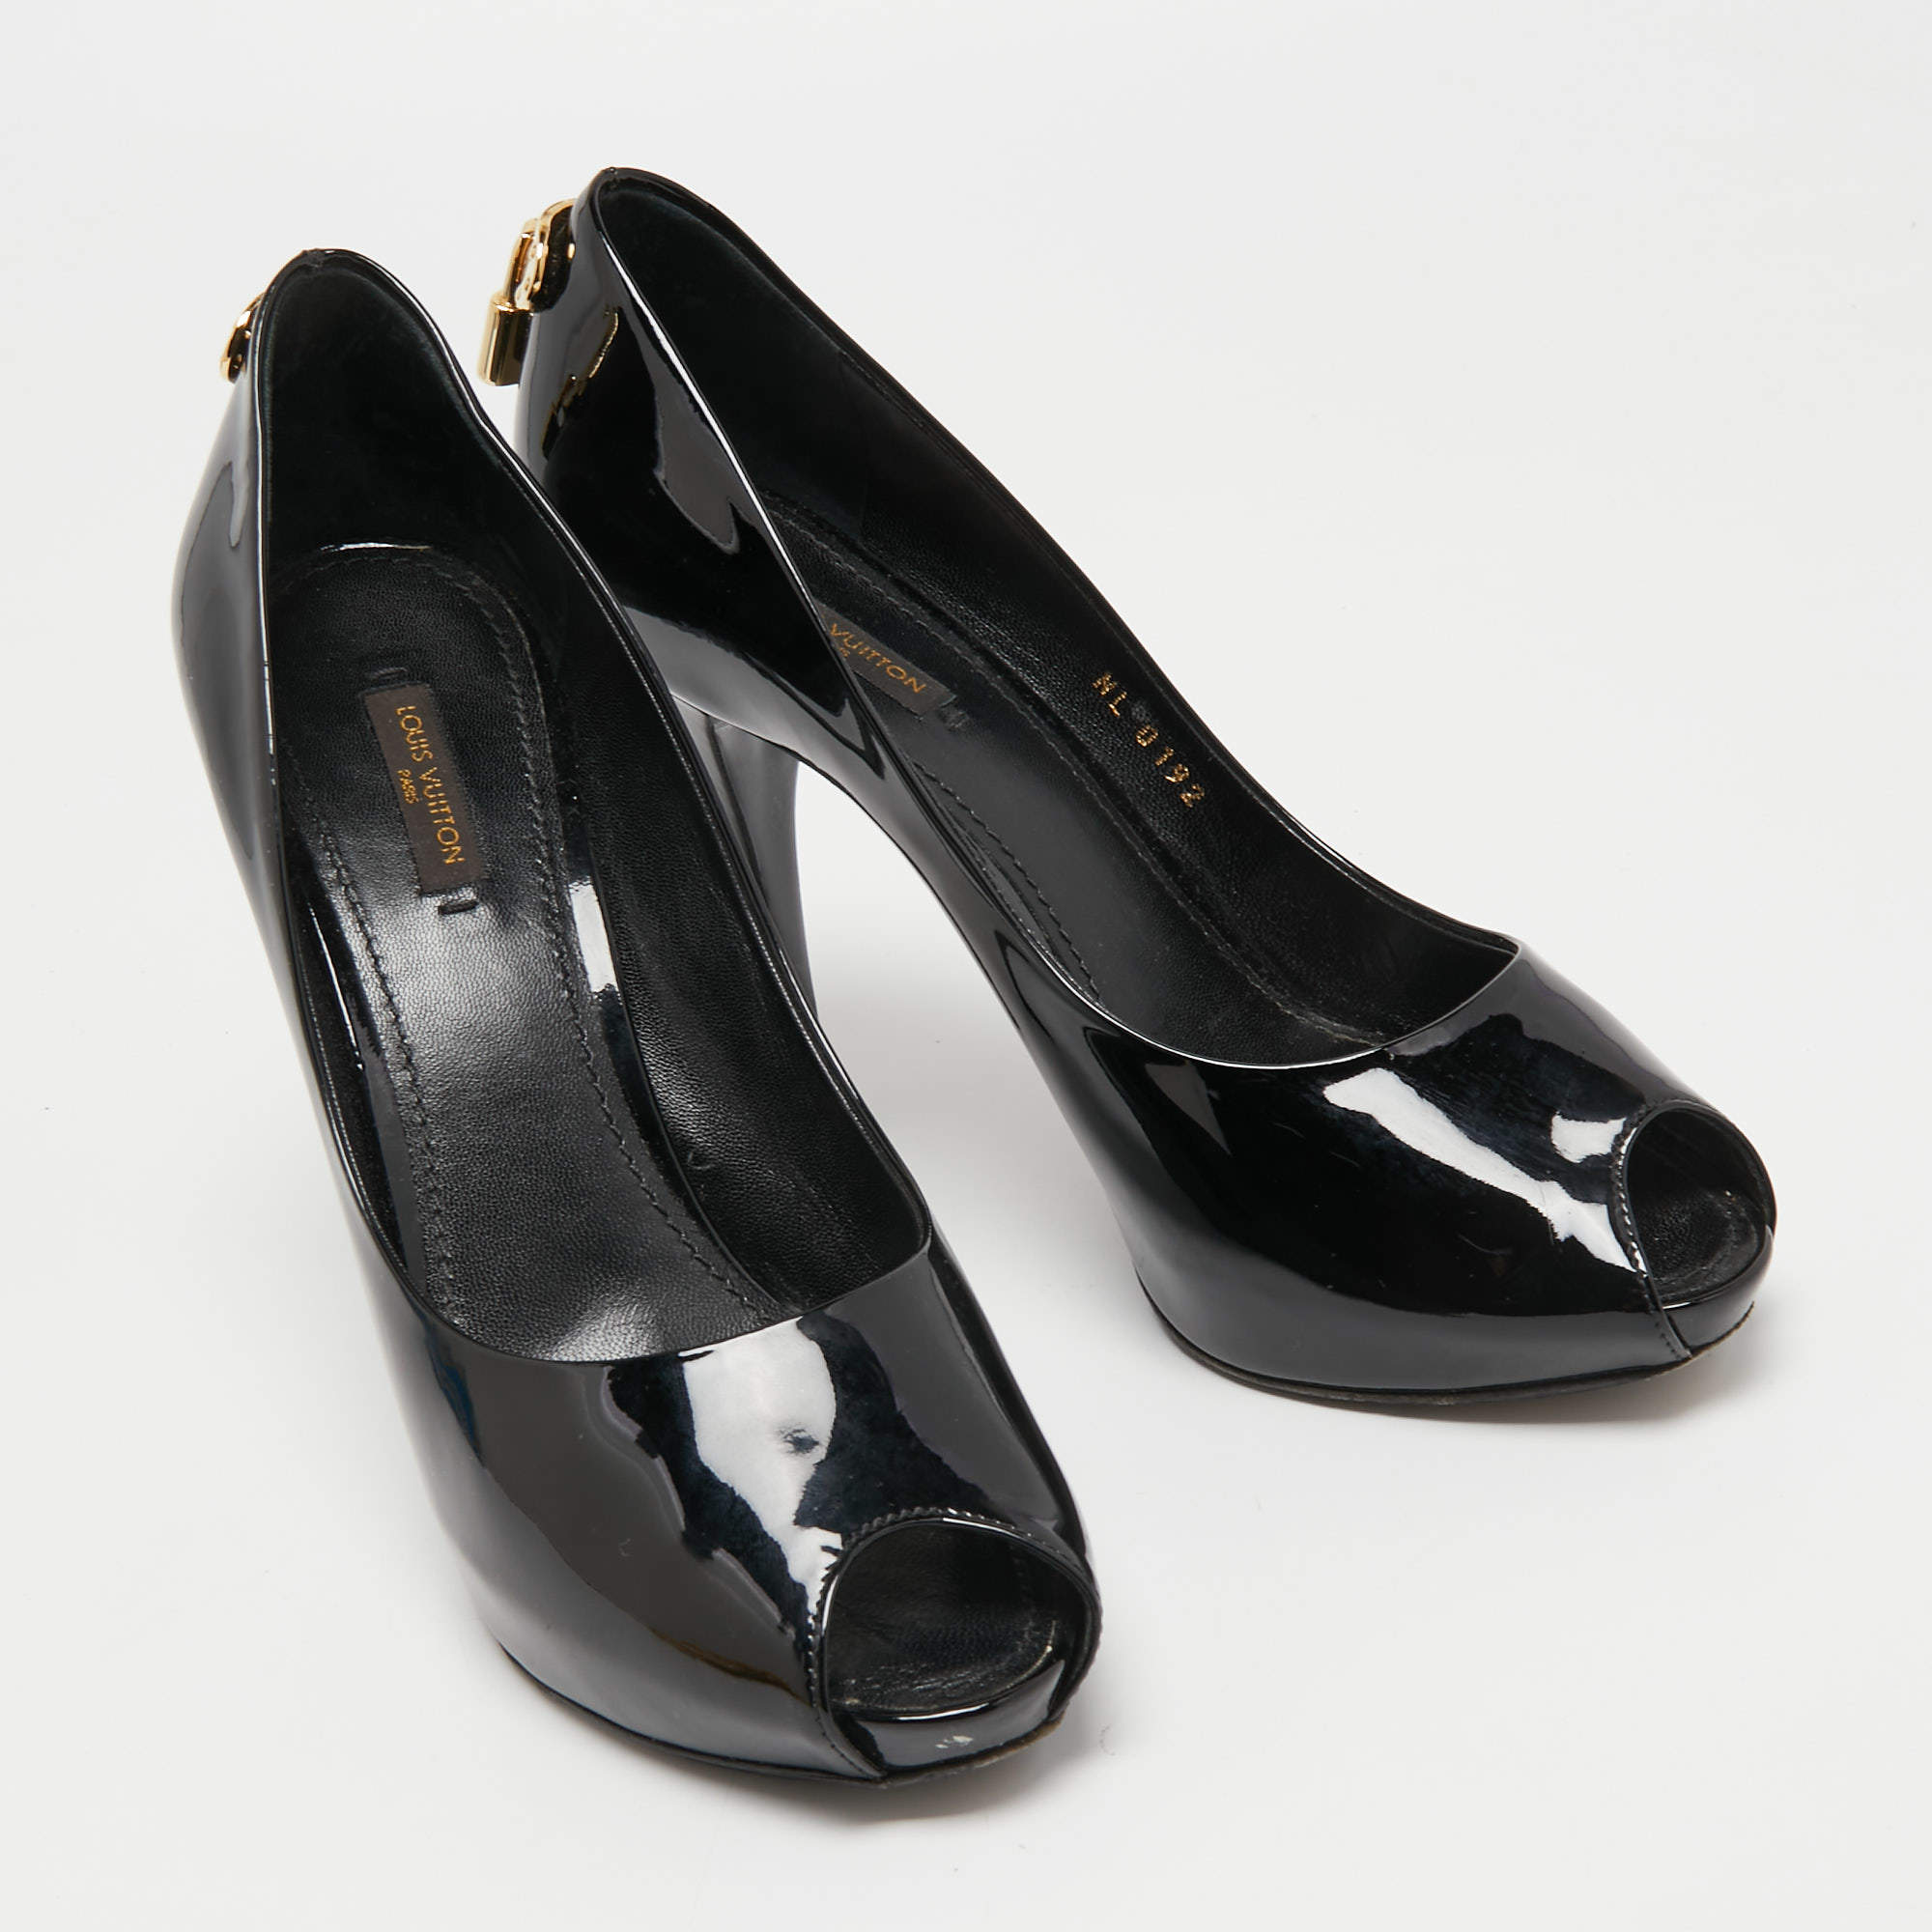 Louis Vuitton LV Logo LockIt Black Patent Leather Oh Really Heels Pumps  39.5 9